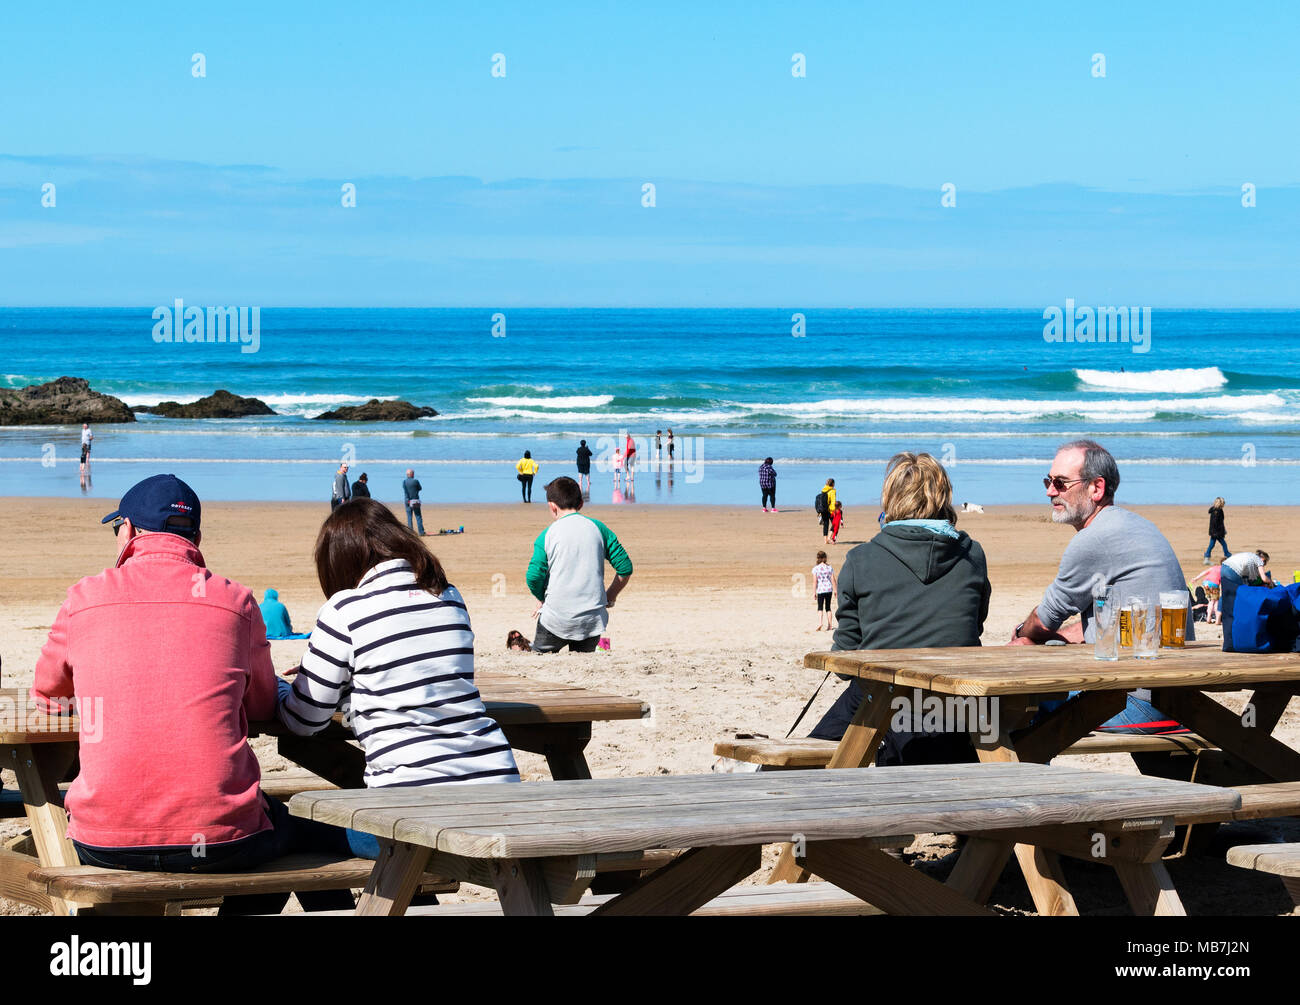 Perranporth, Cornwall, UK. 8th April 2018. UK Weather. Warm sunshine welcomed visitors to the beach for the Easter break in Cornwall, UK. Photo Credit: Kevin Britland/Alamy LIve News. Stock Photo